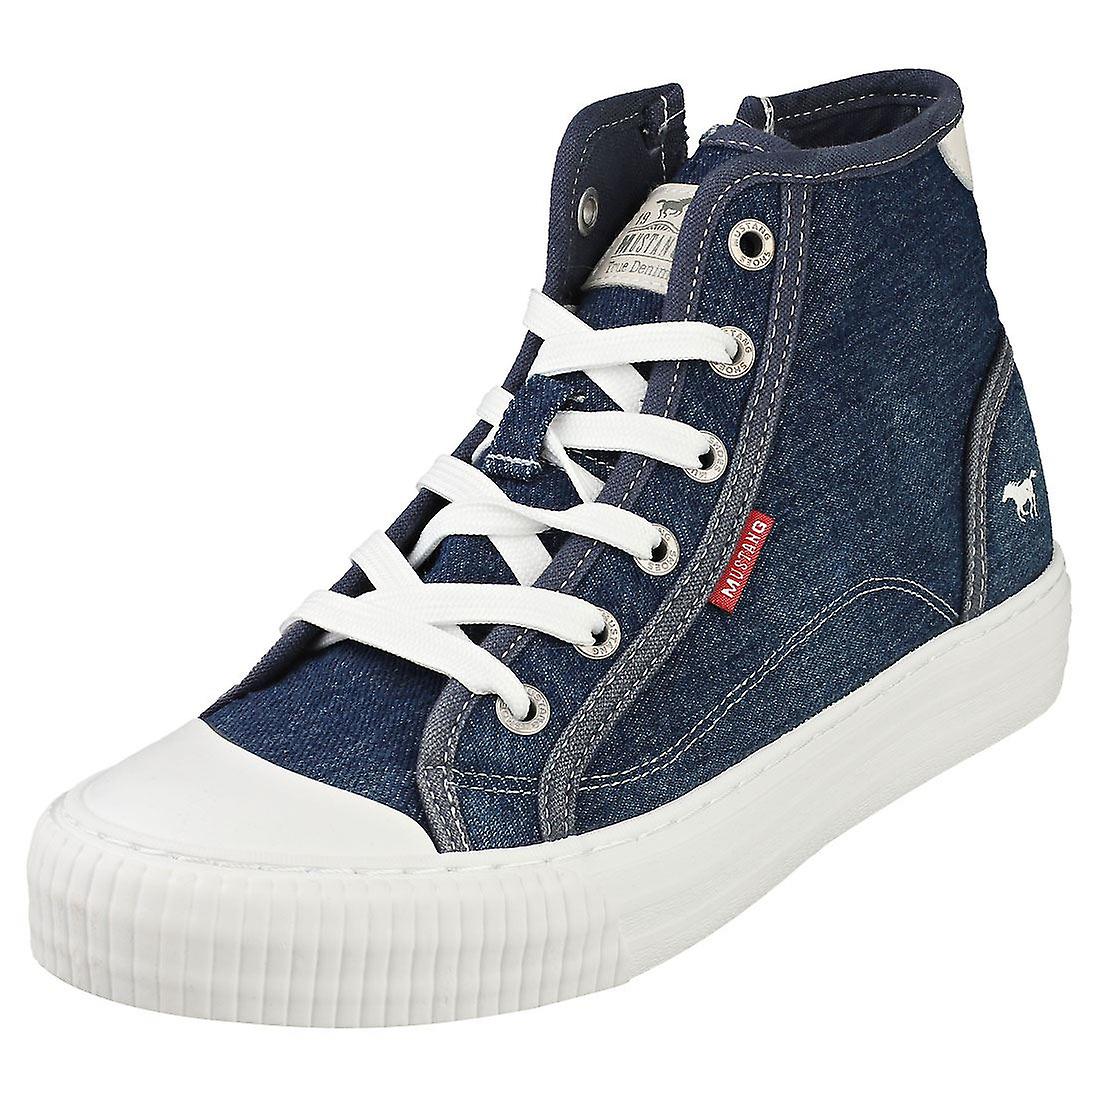 Mustang Hi-Top Sneaker Denim Blue - PLEASE CALL FOR SIZE AVAILABILITY